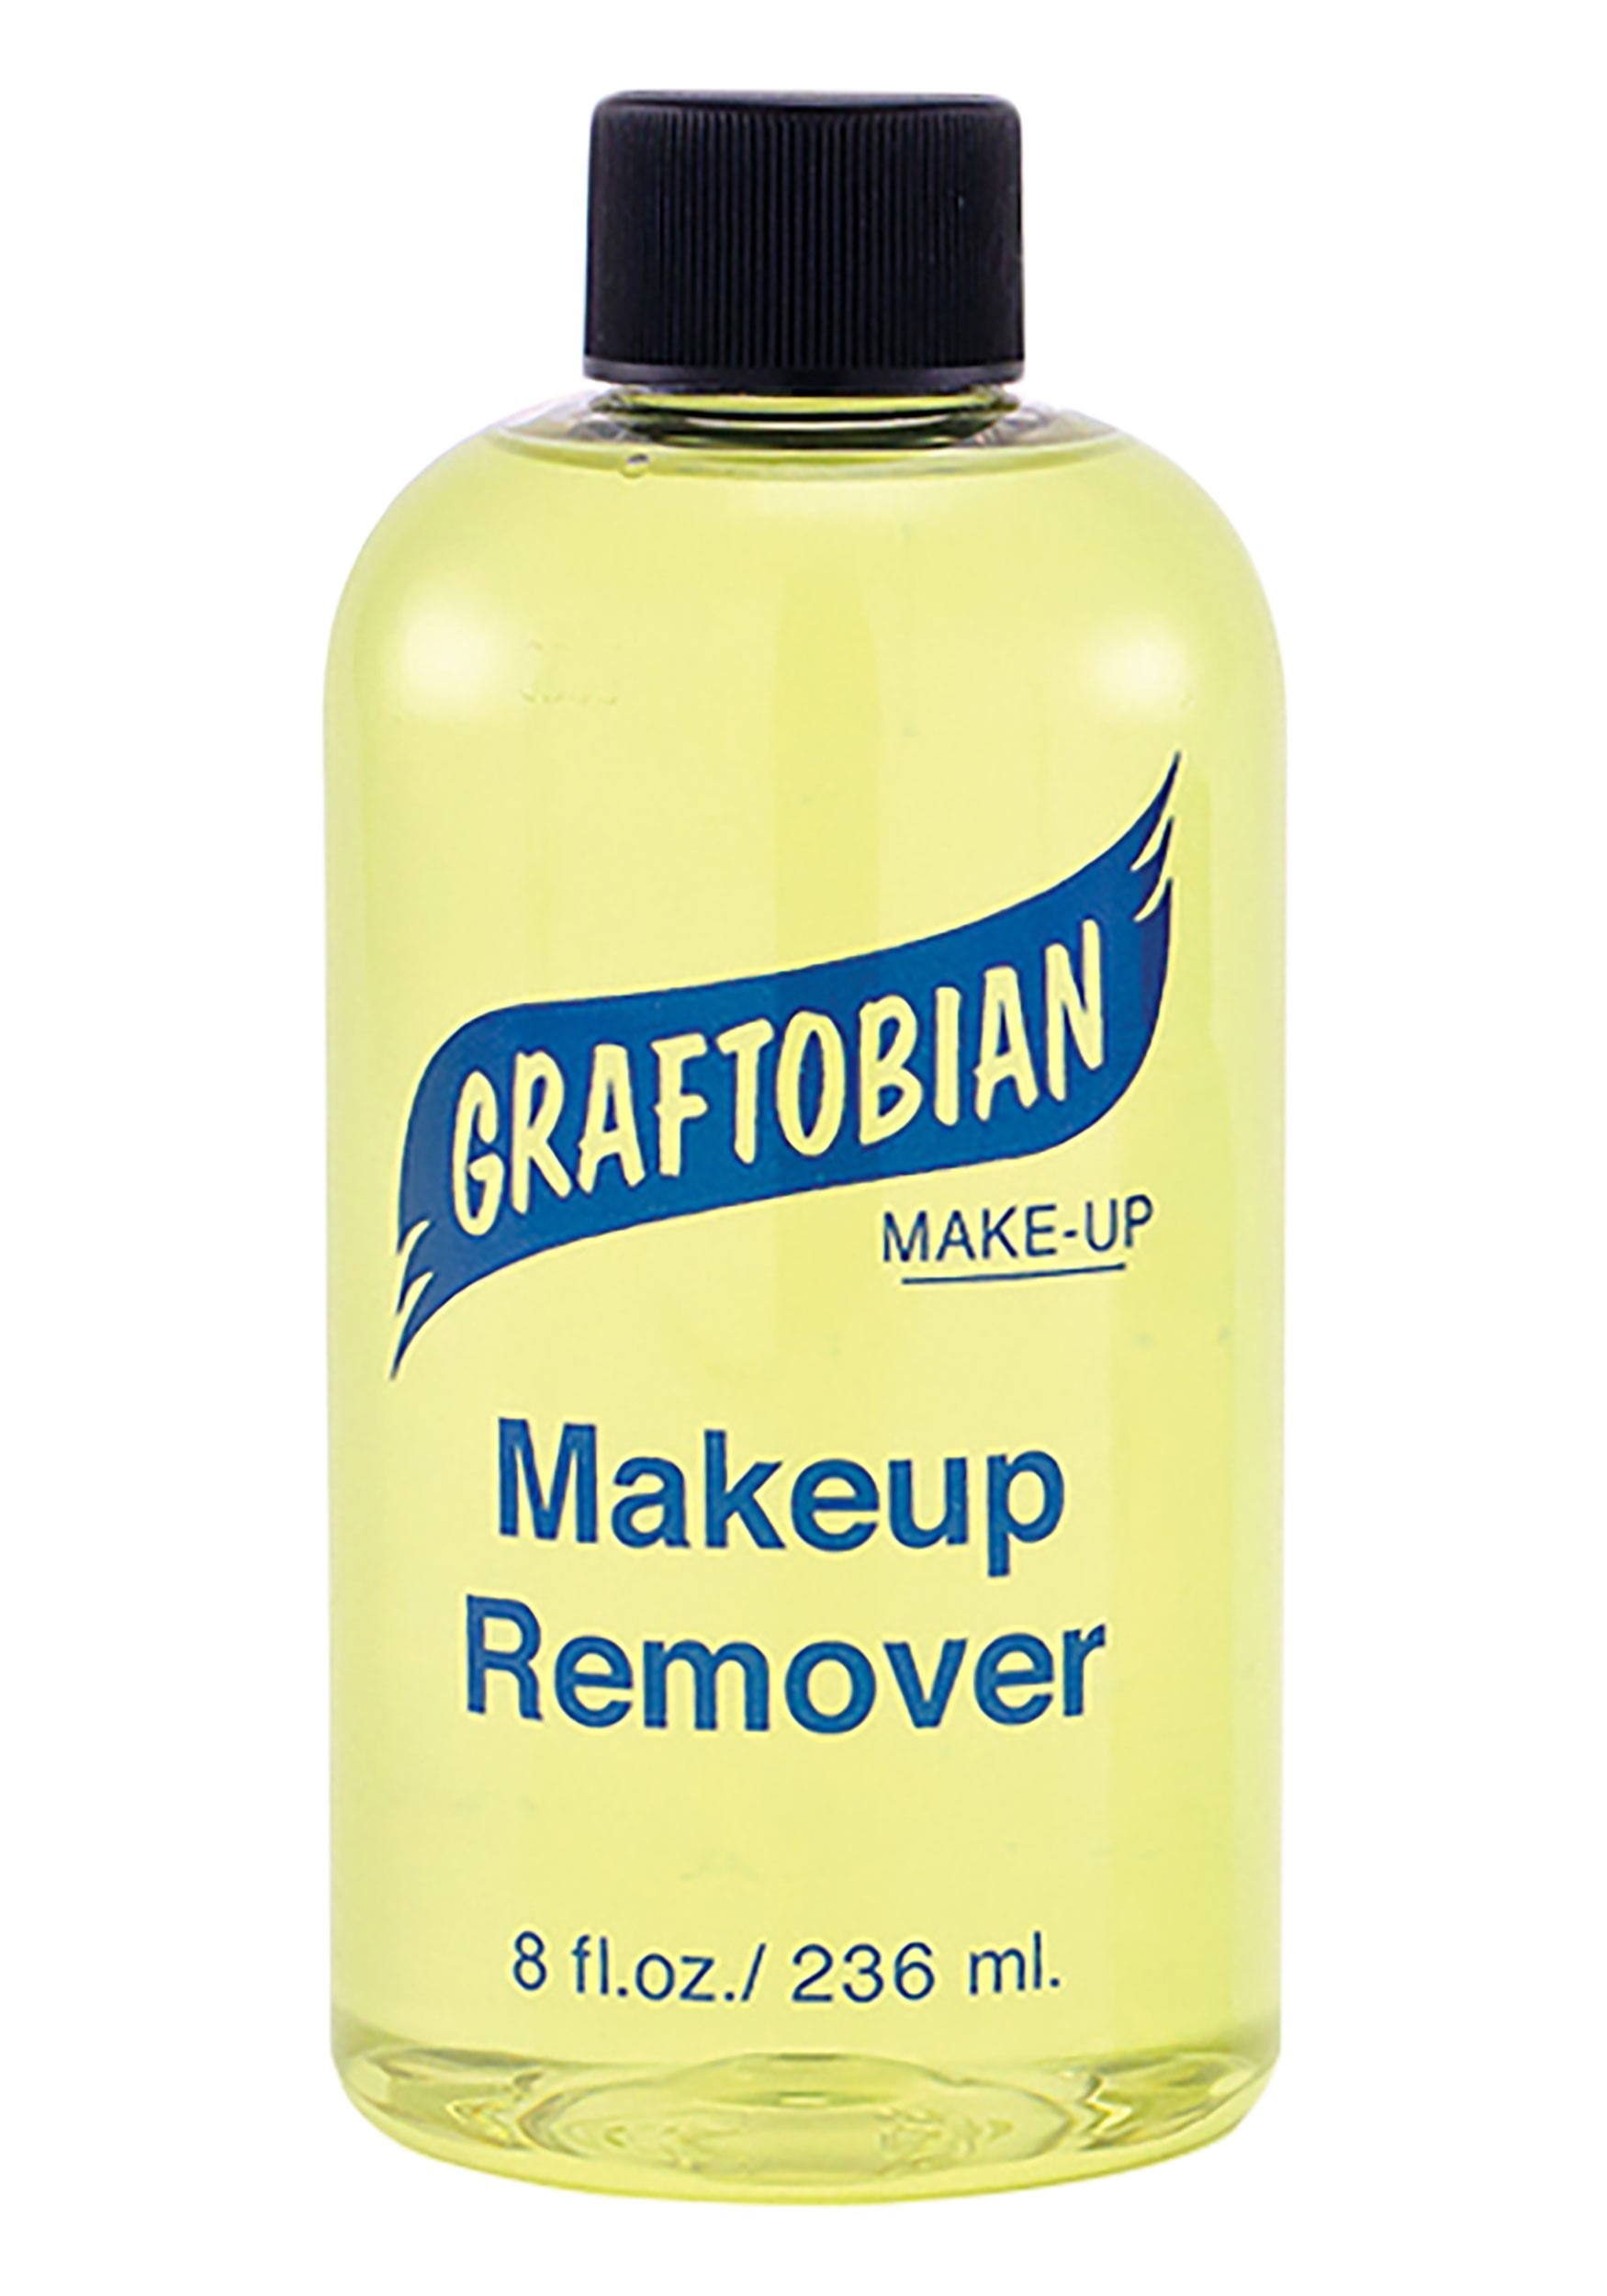 Eight ounce Makeup Remover